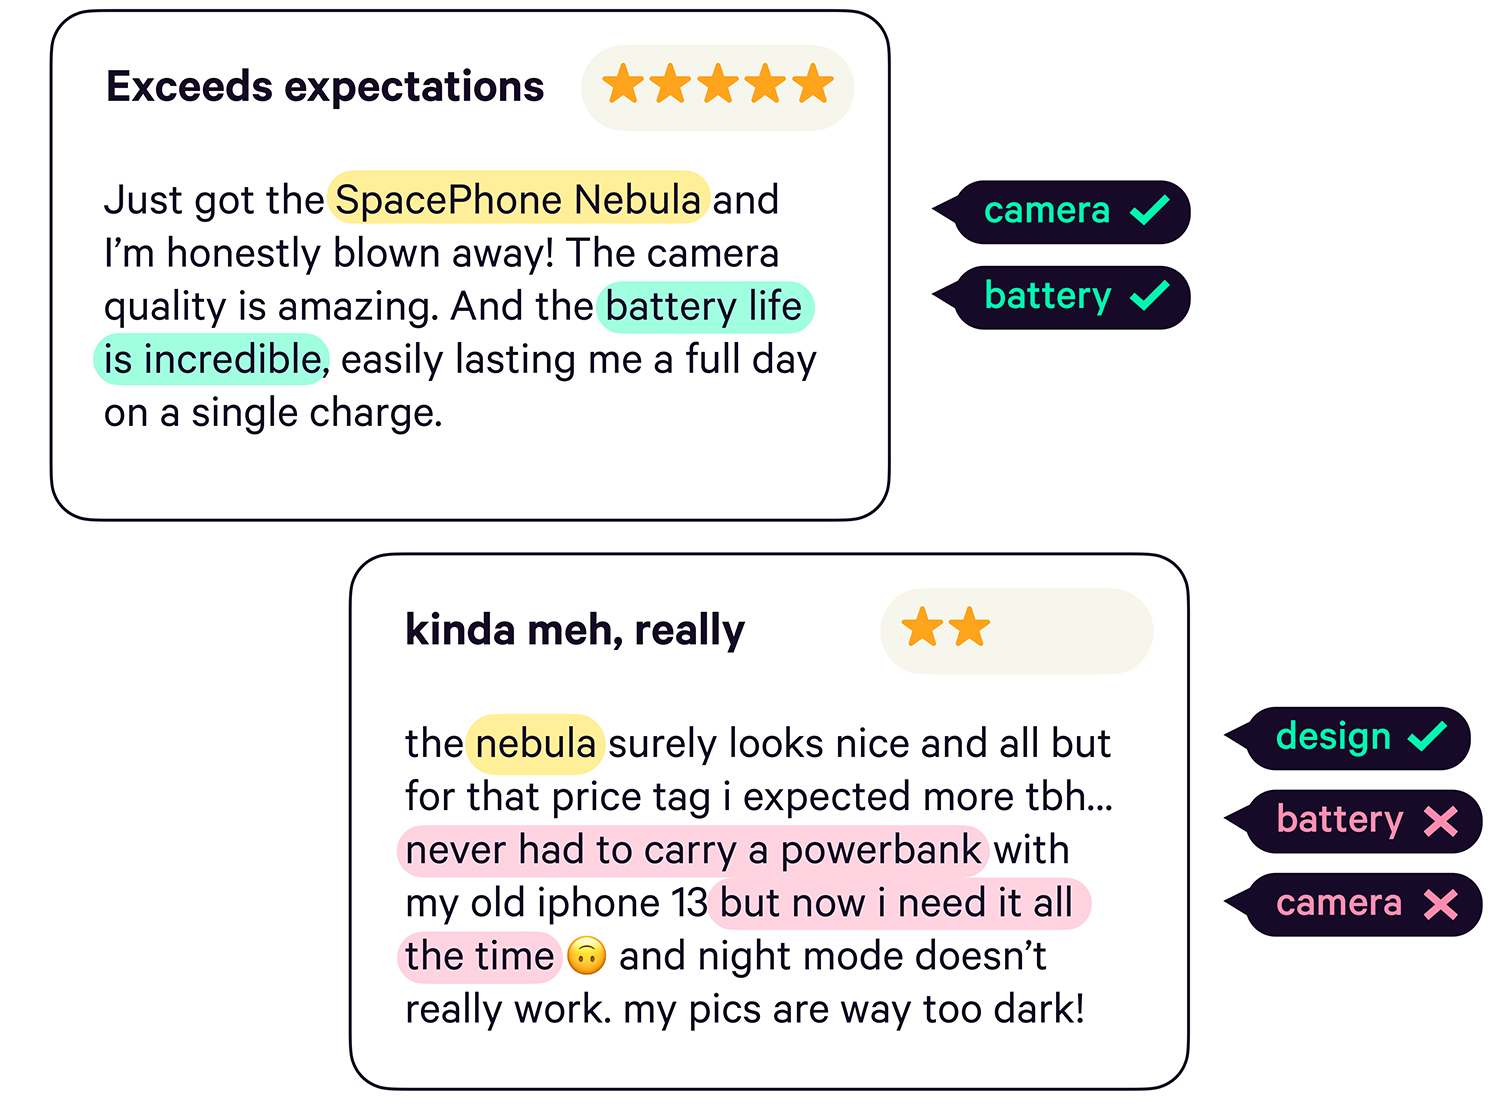 Examples of phone reviews